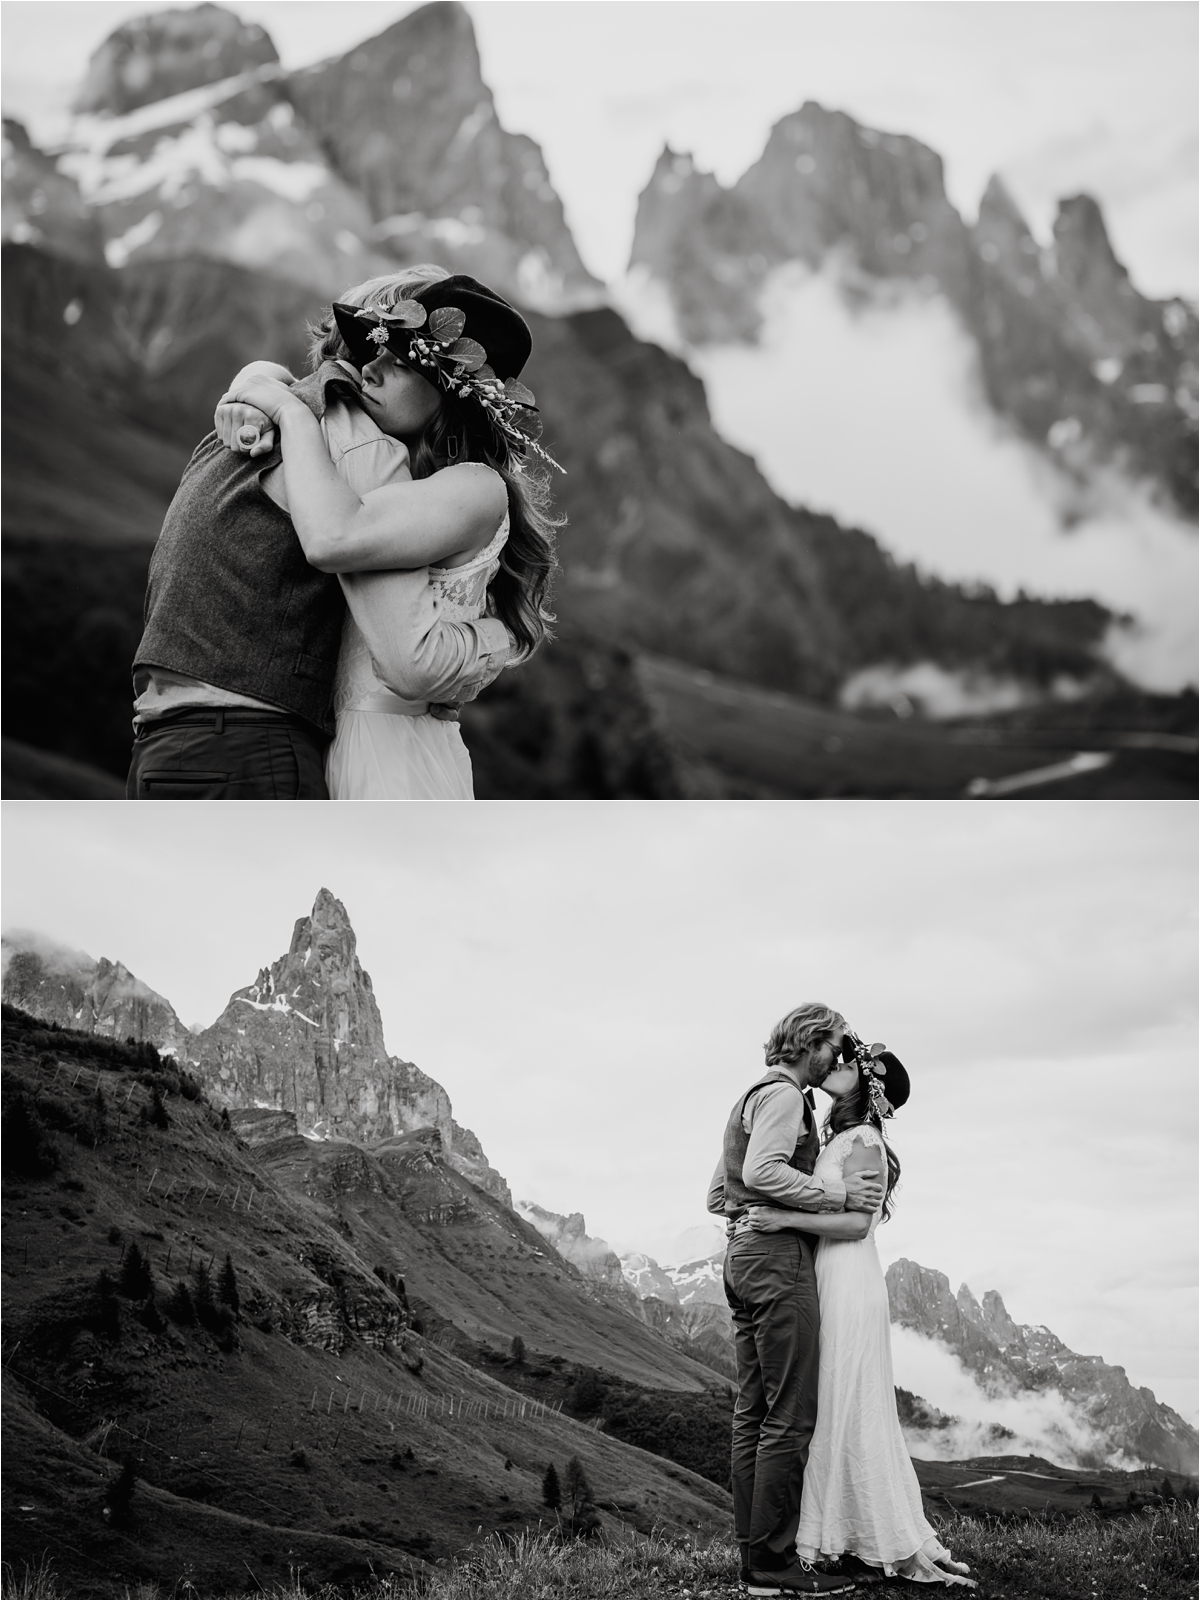 Black & white pictures of a bride and groom embracing with the Dolomites in the background. Photography by Wild Connections Photography